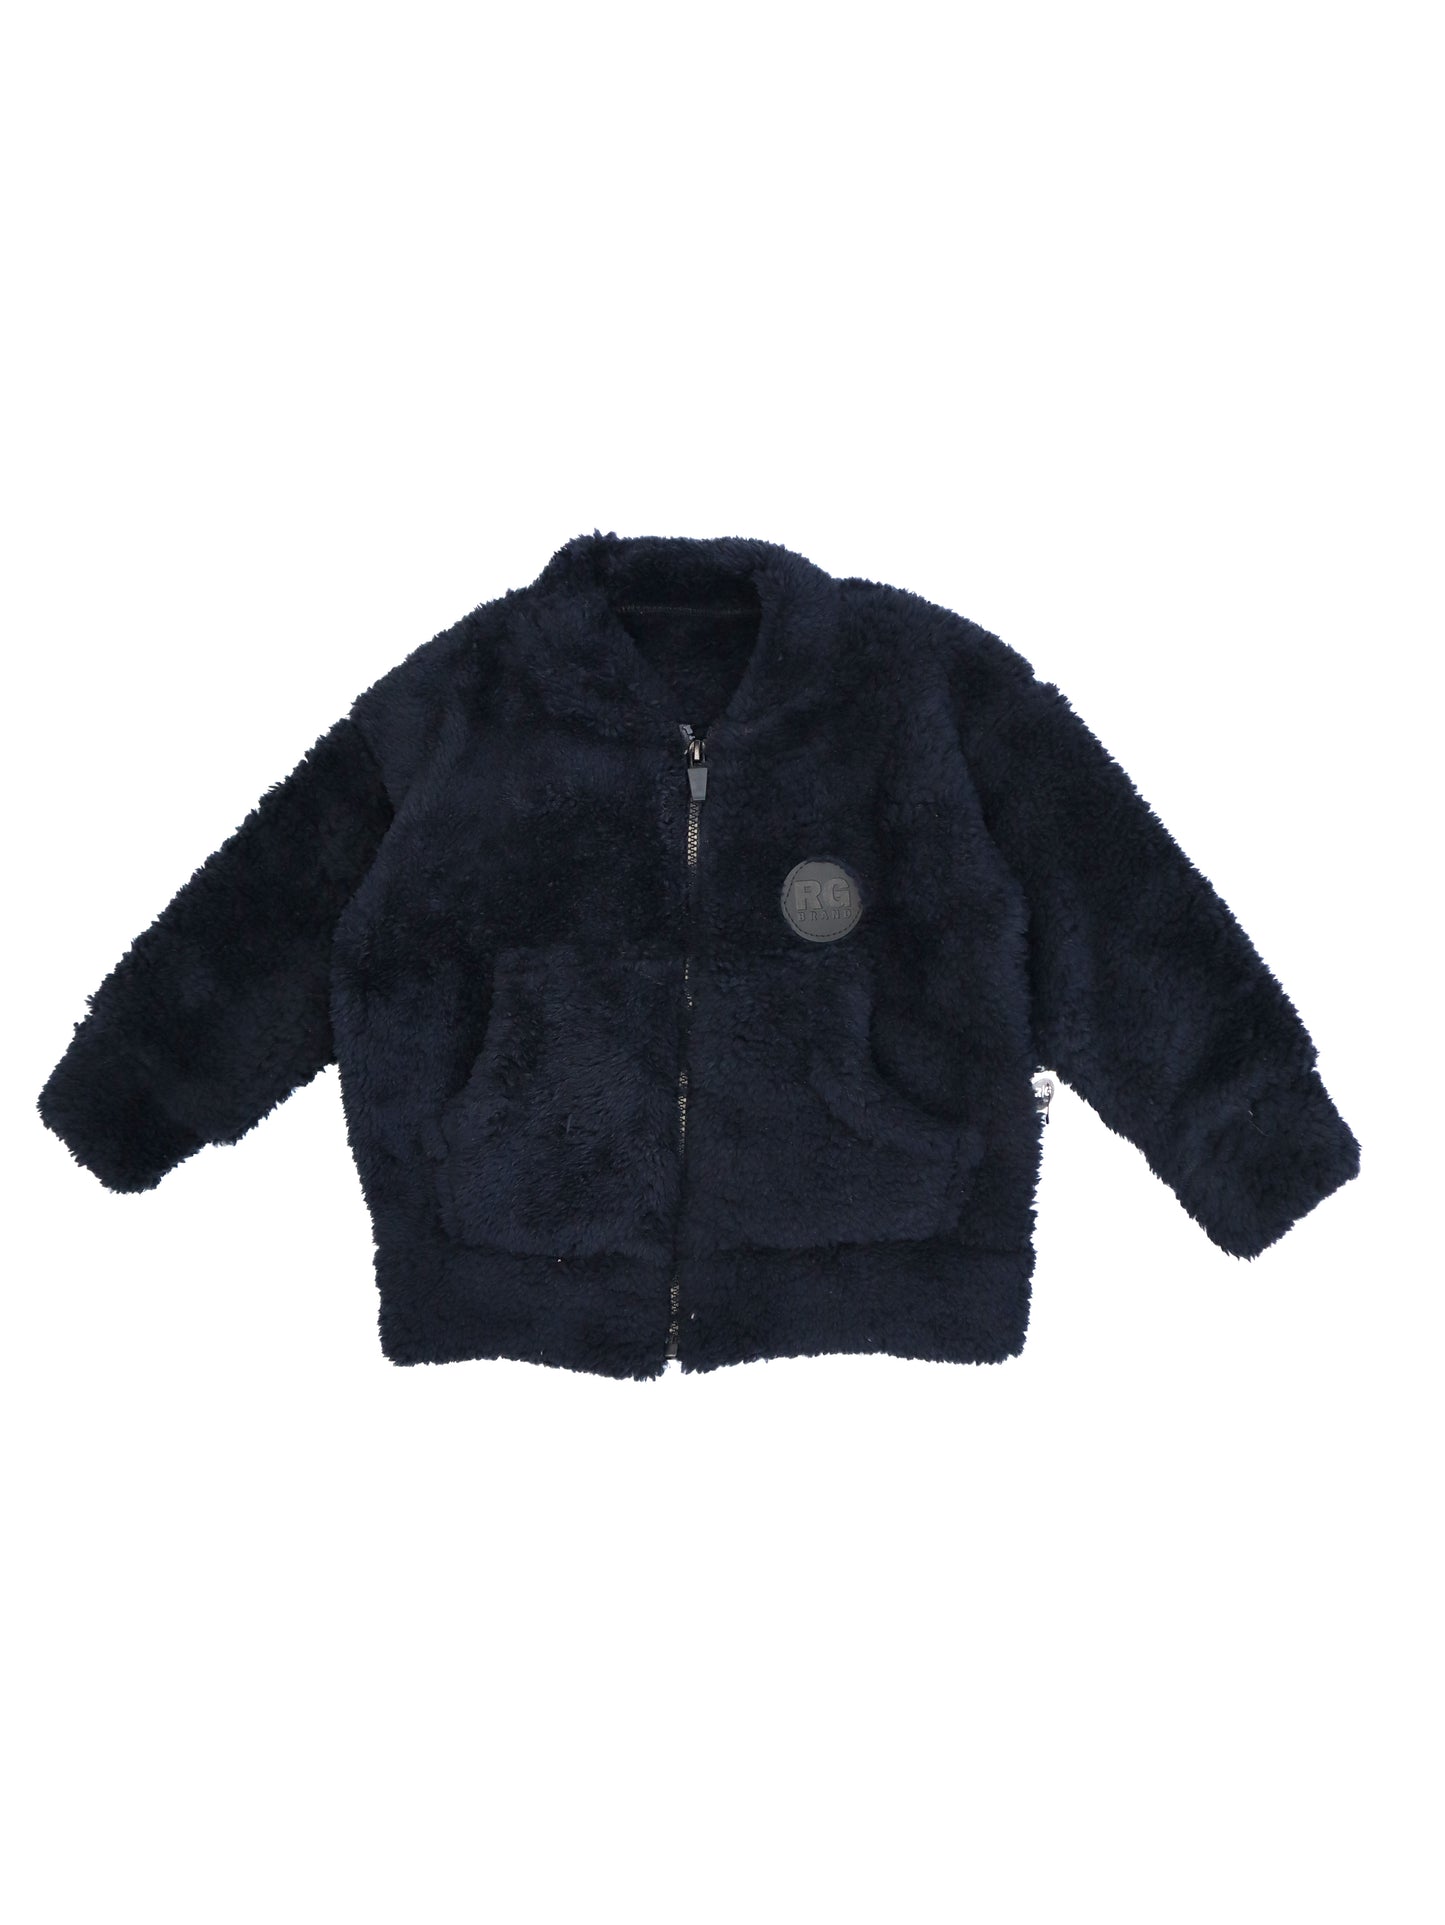 Baby Unisex Winter Cardigan with Zipper and Pockets